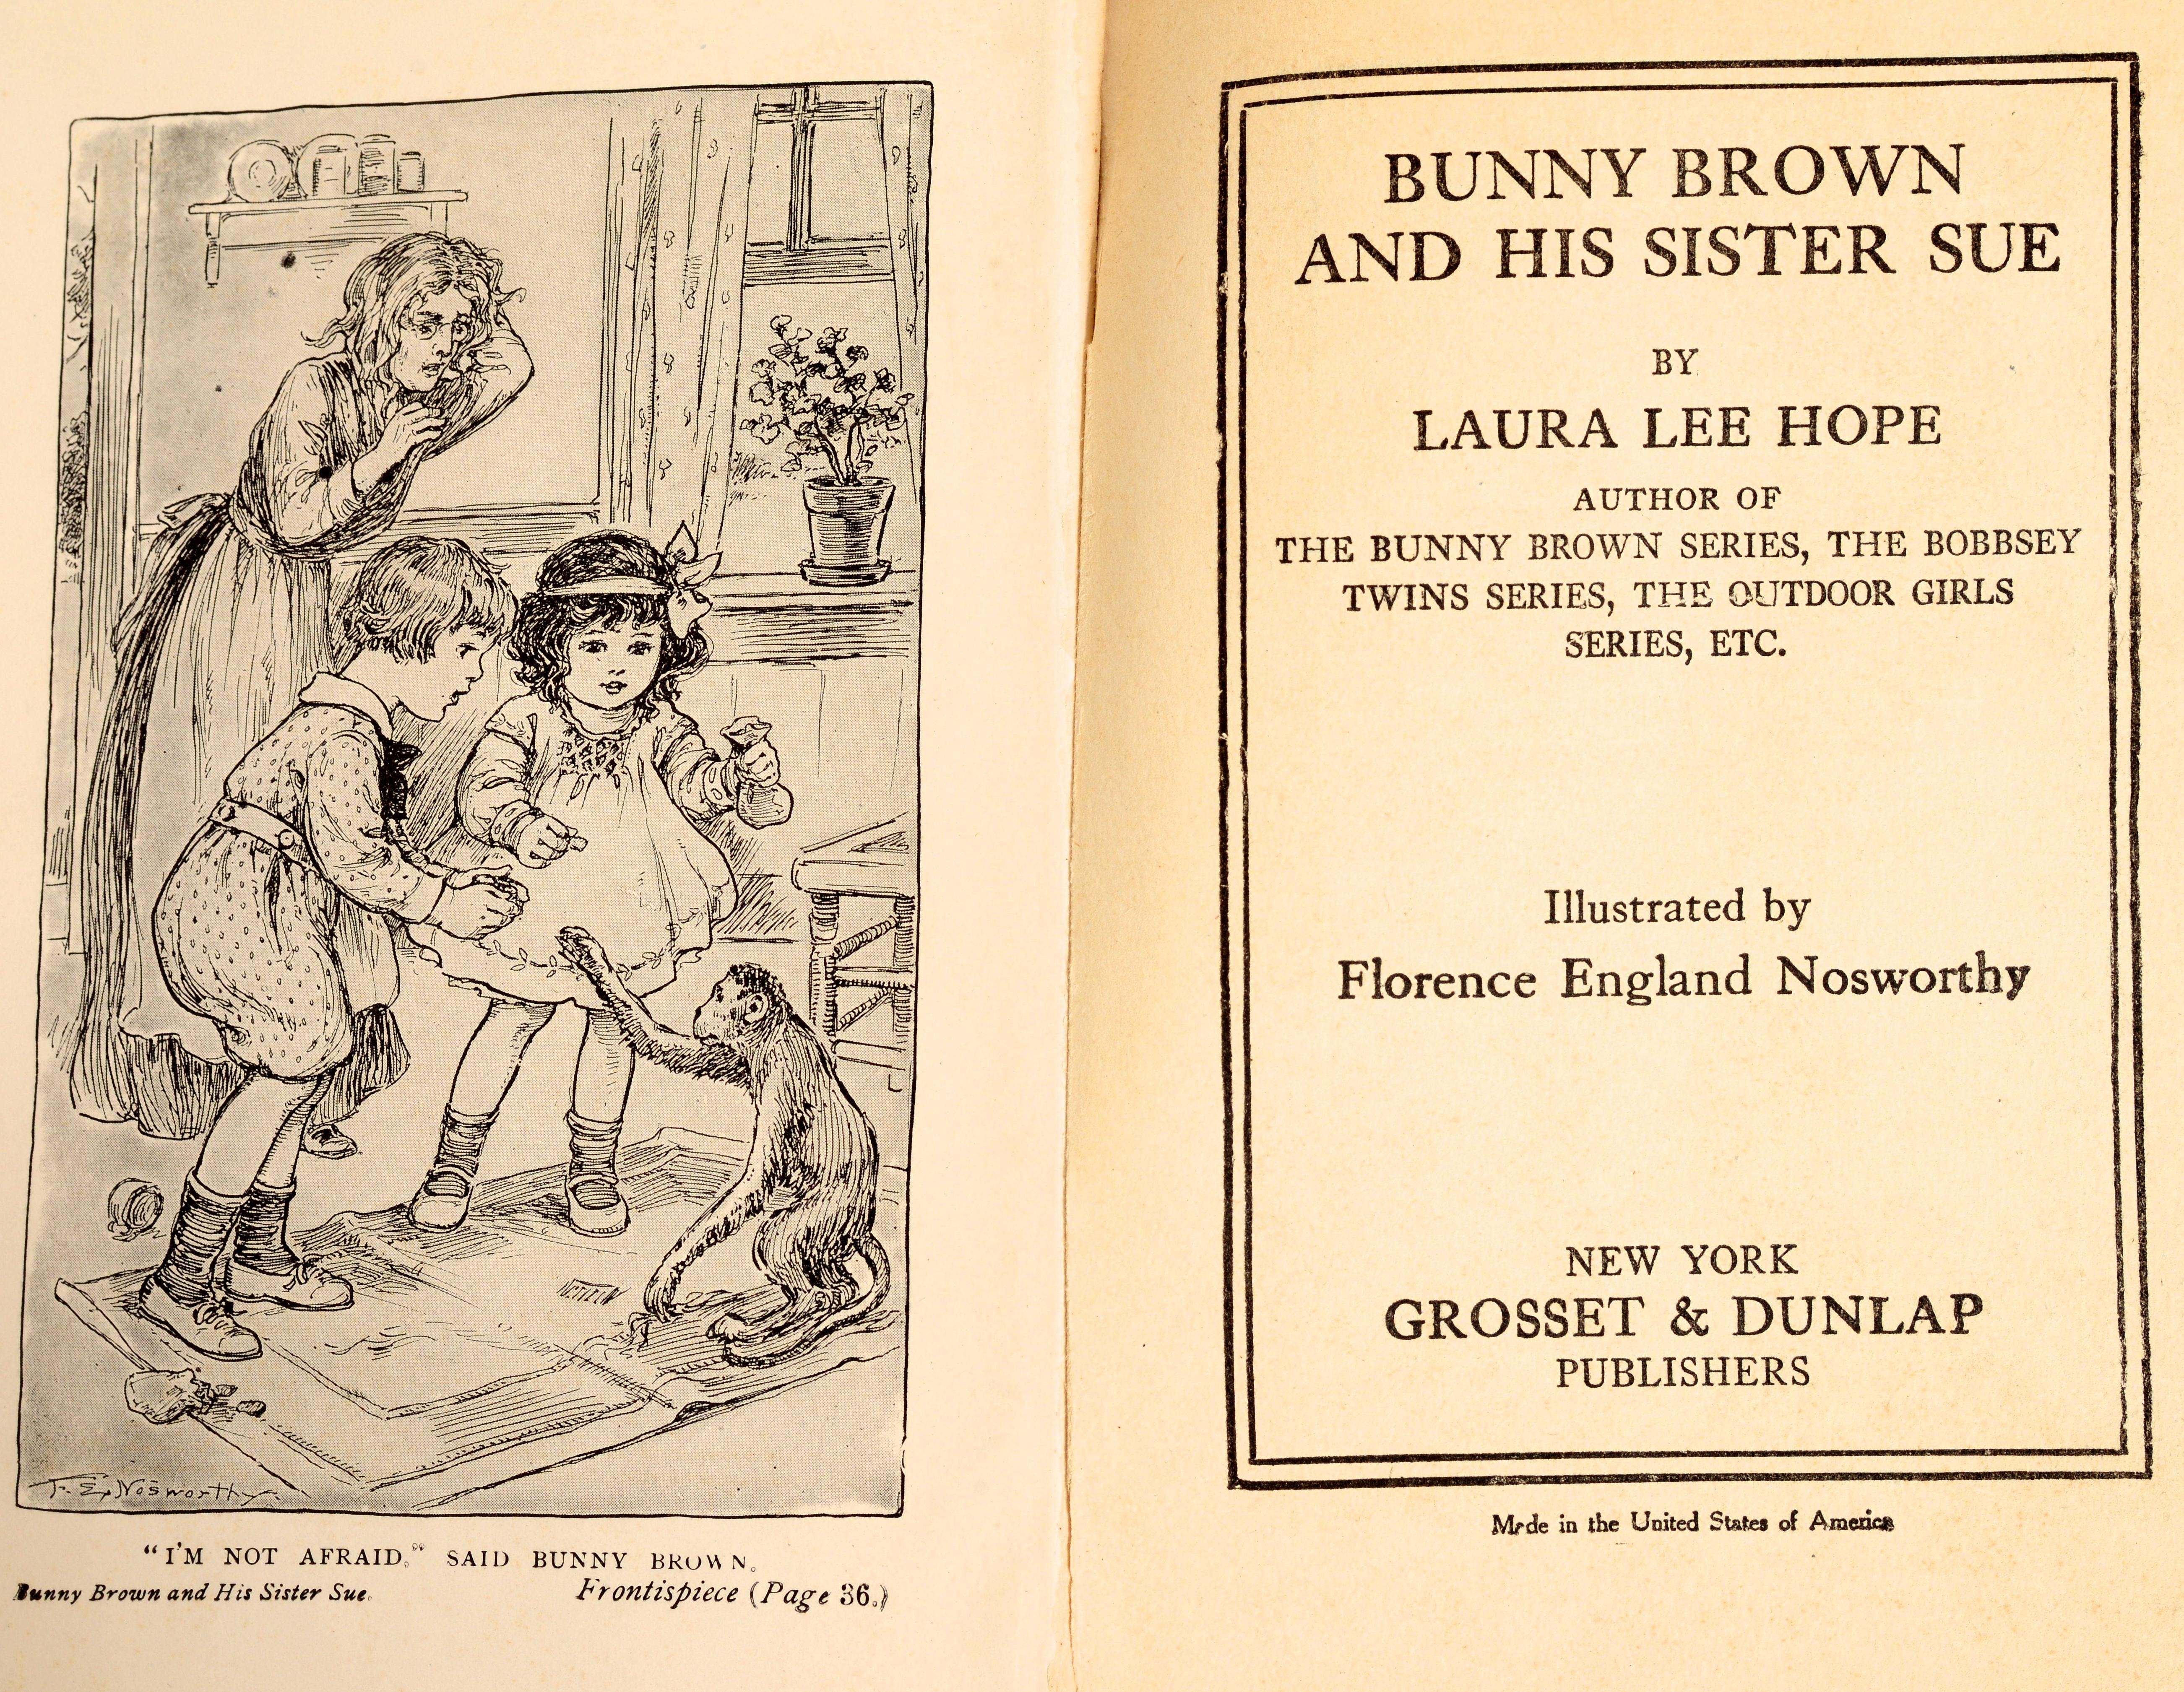 Set of 15 Bunny Brown and His Sister Sue Series of Books, by Laura Lee Hope. Grosset & Dunlap. New York.1st Ed hardcovers, no dust jacket as published. This Stratemeyer syndicate series was ghostwritten by the prolific Howard Garis. Stratemeyer